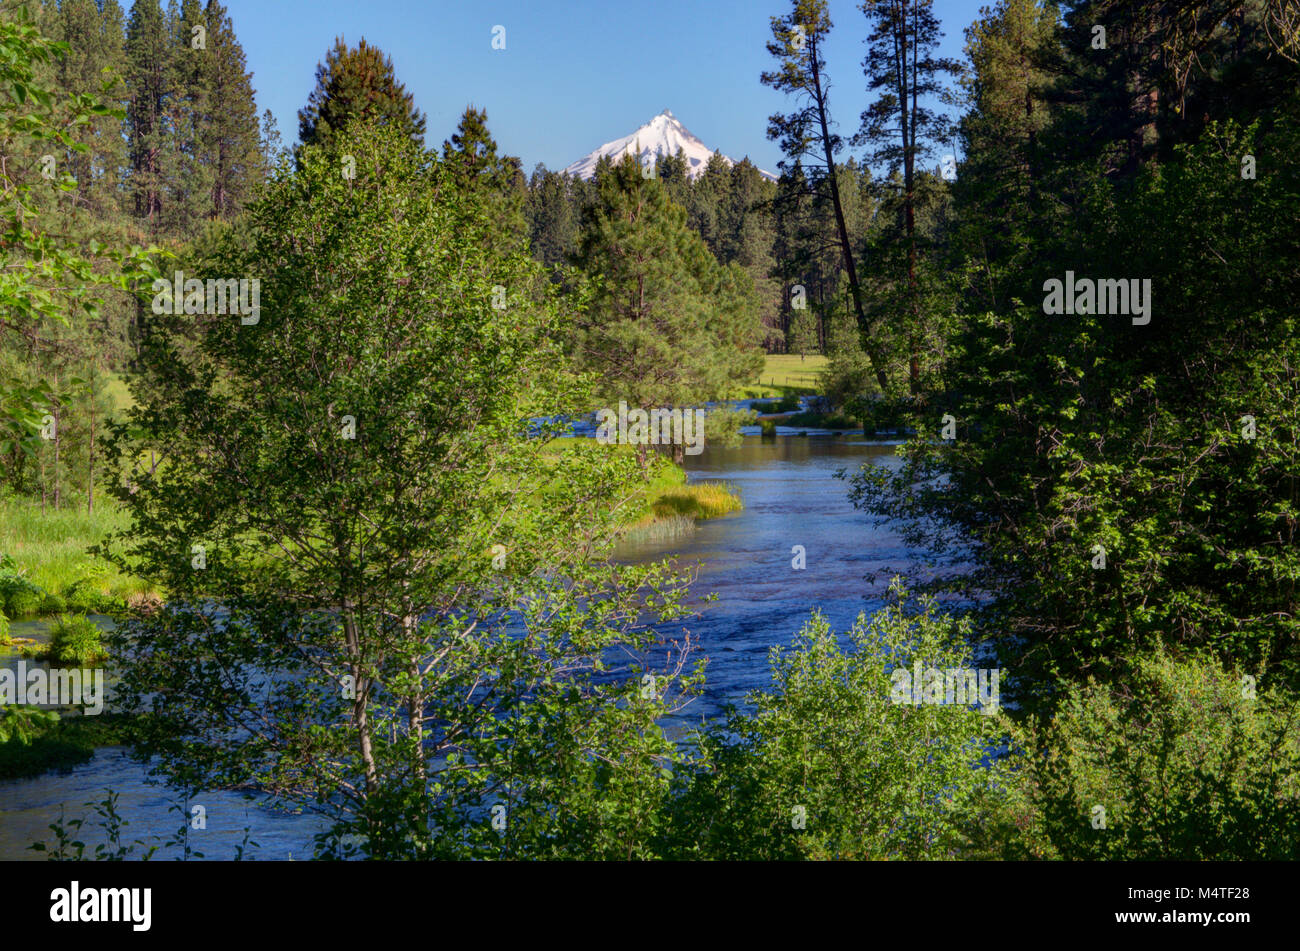 Mt. Jefferson and the head of the Metolius River in central Oregon Stock Photo